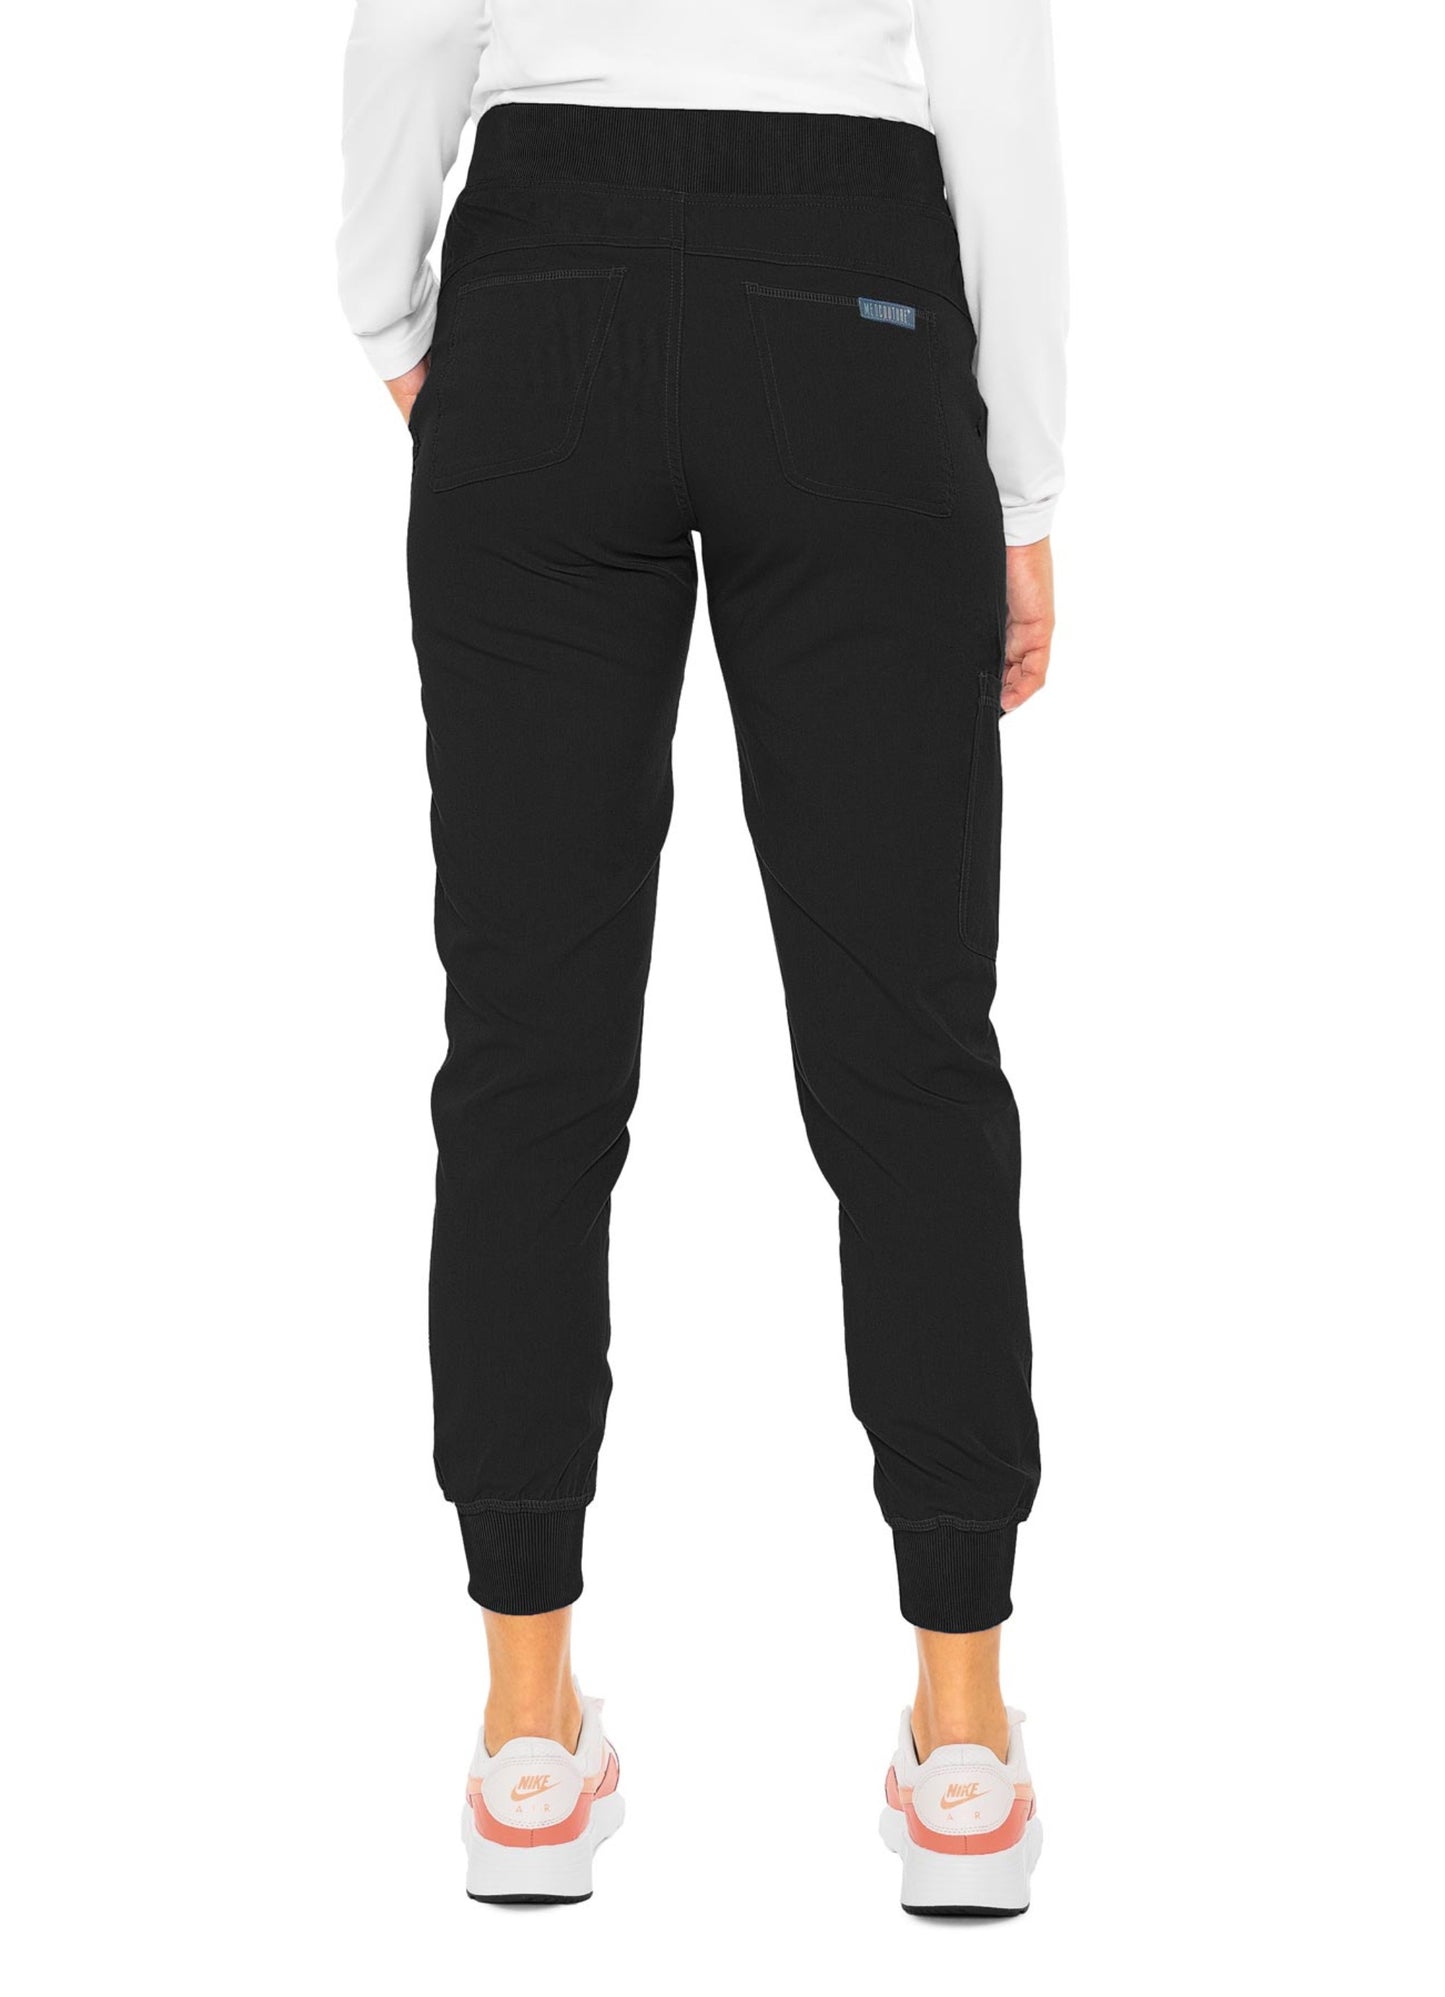 Med Couture Jogger Yoga Pant